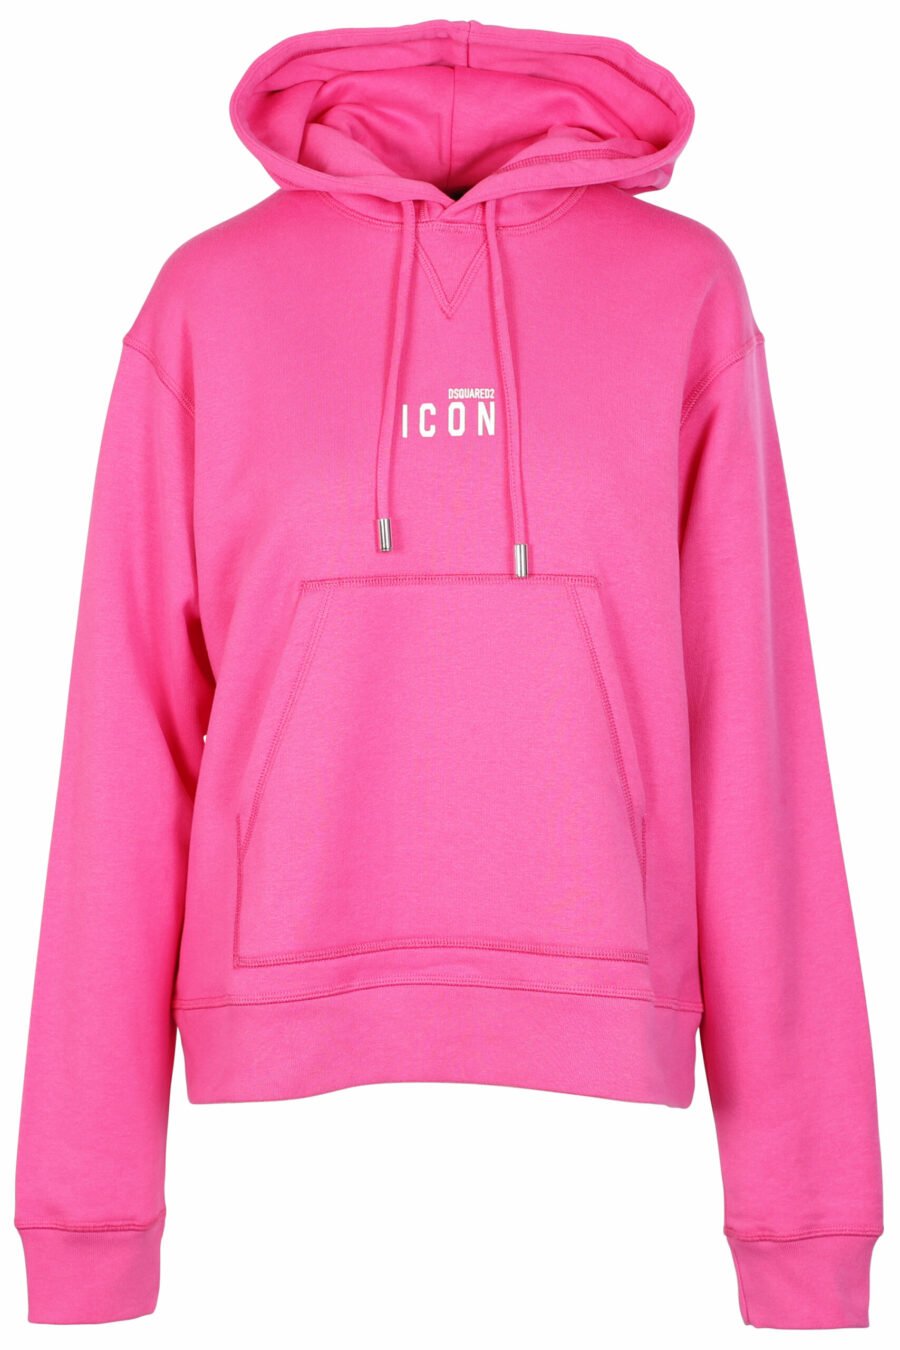 Fuchsia hooded sweatshirt with central "Icon" minilogue - 8054148005221 scaled